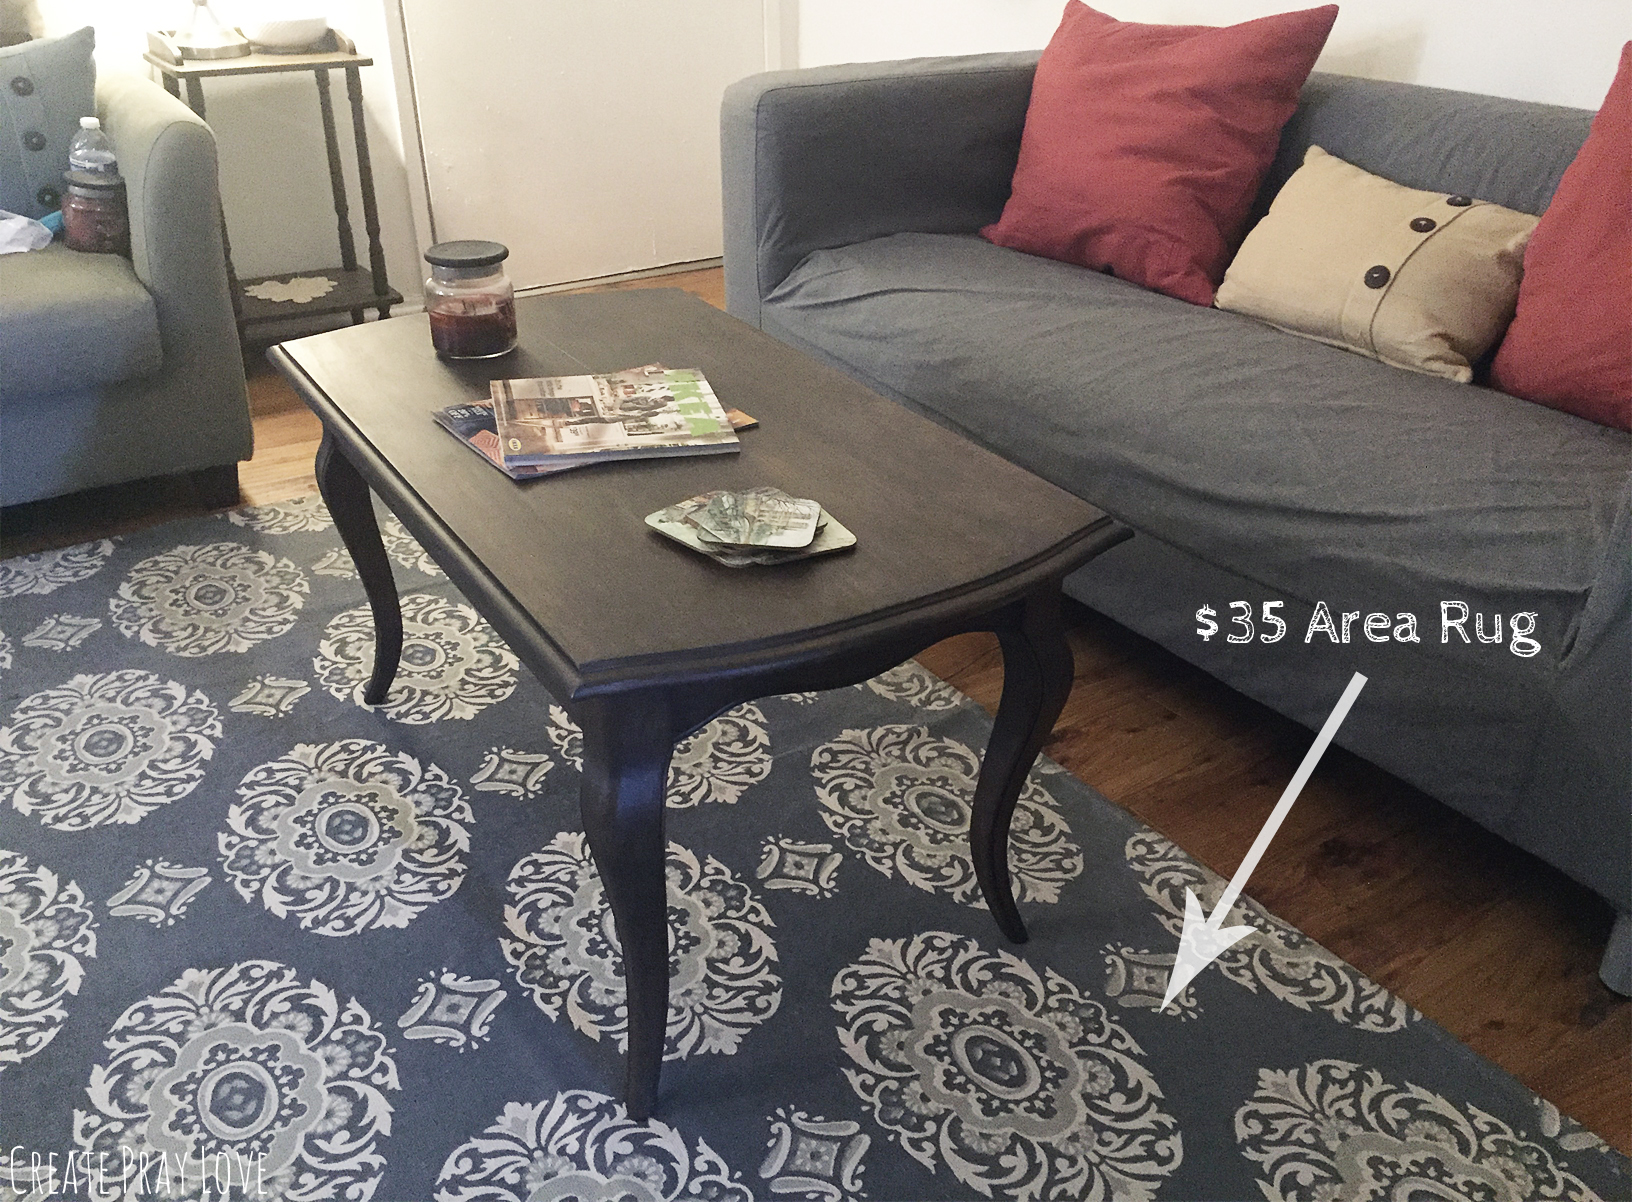 Create Pray Love | The One Trick to Finding Cheaper Area Rugs- so crazy!